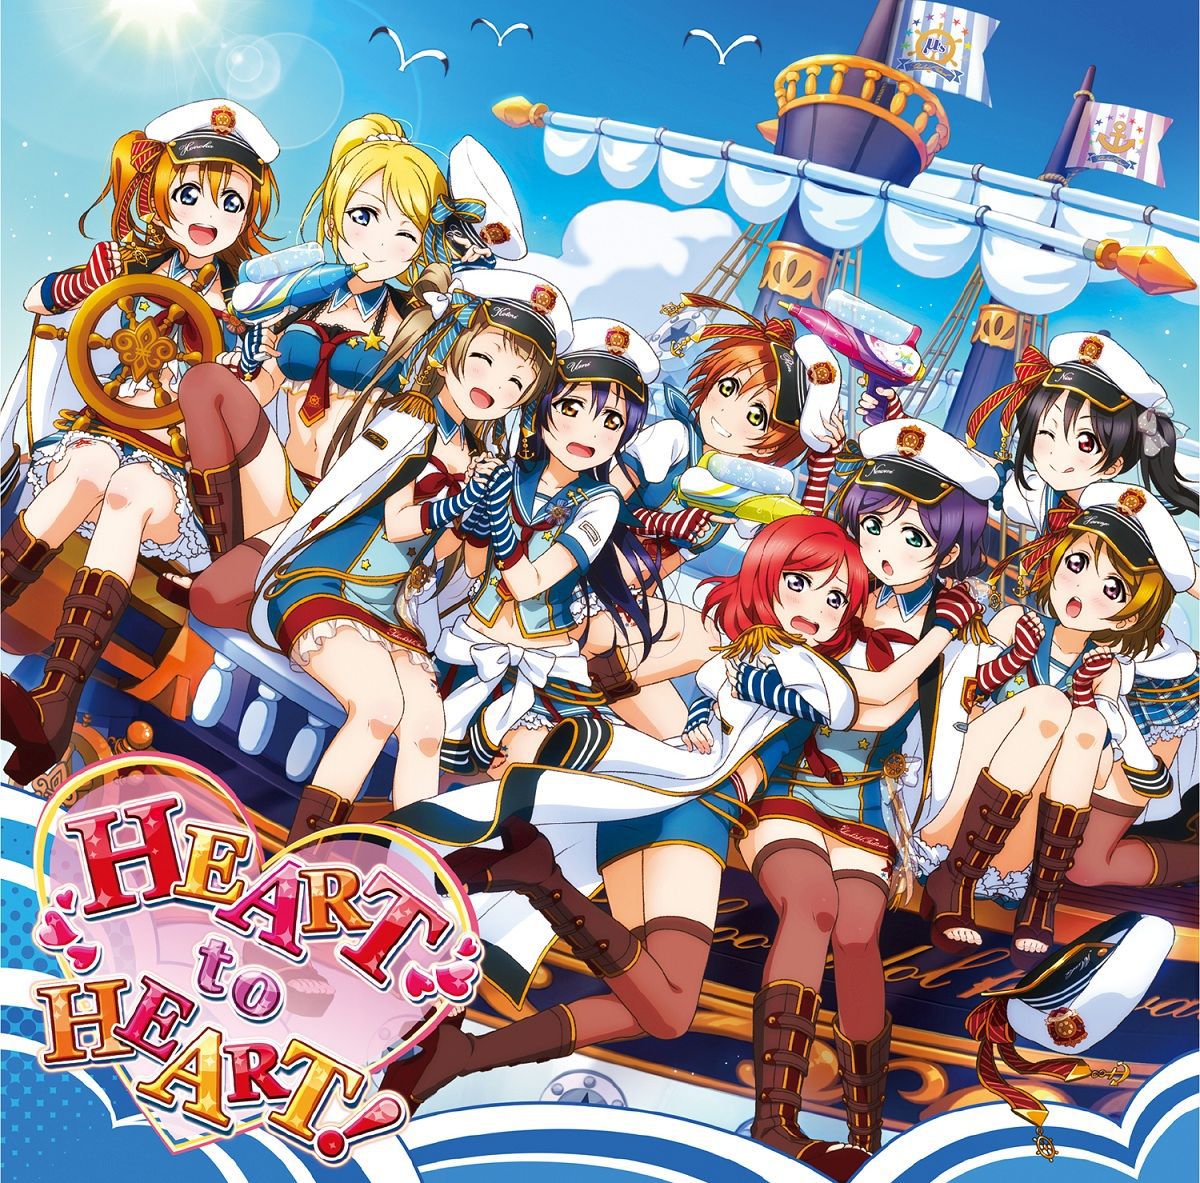 [Large image] "love live! ' The corner www nearly deflated this week and see the beautiful illustrations of high quality CD's 53